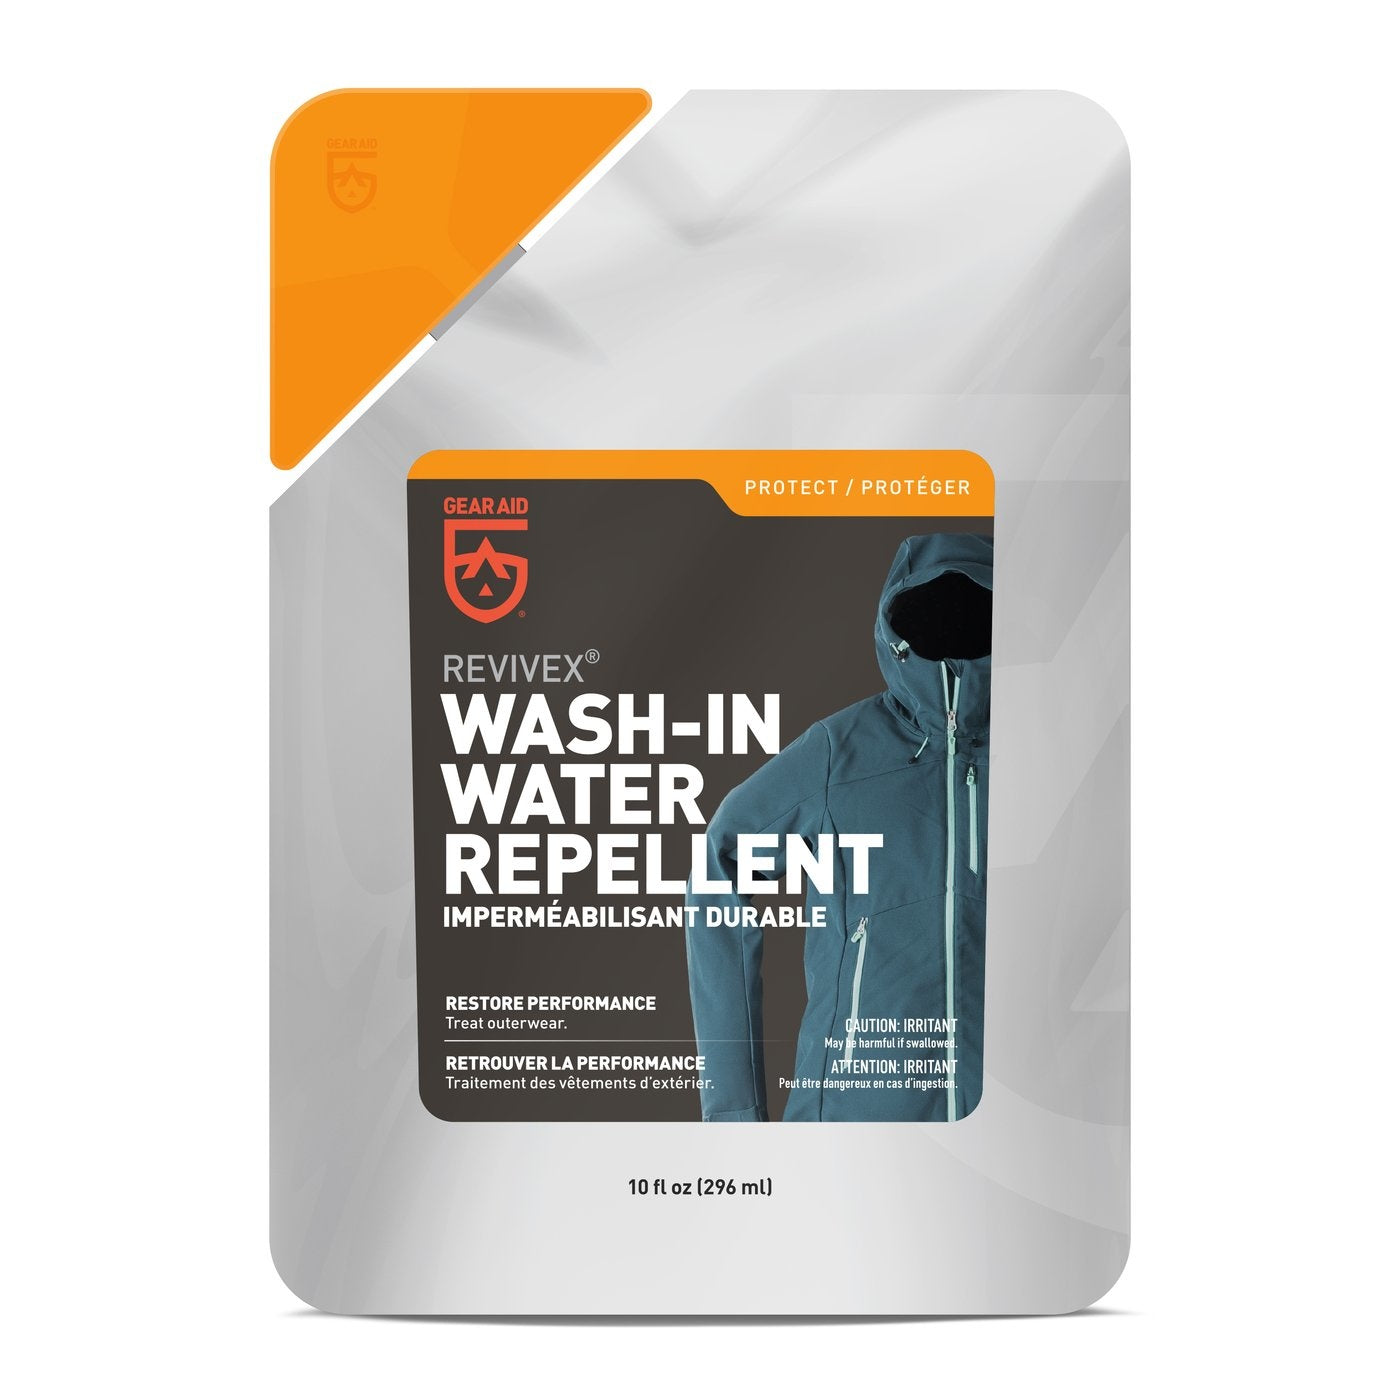 Gear Aid - Revivex - Wash-in Water Repellent 296ml